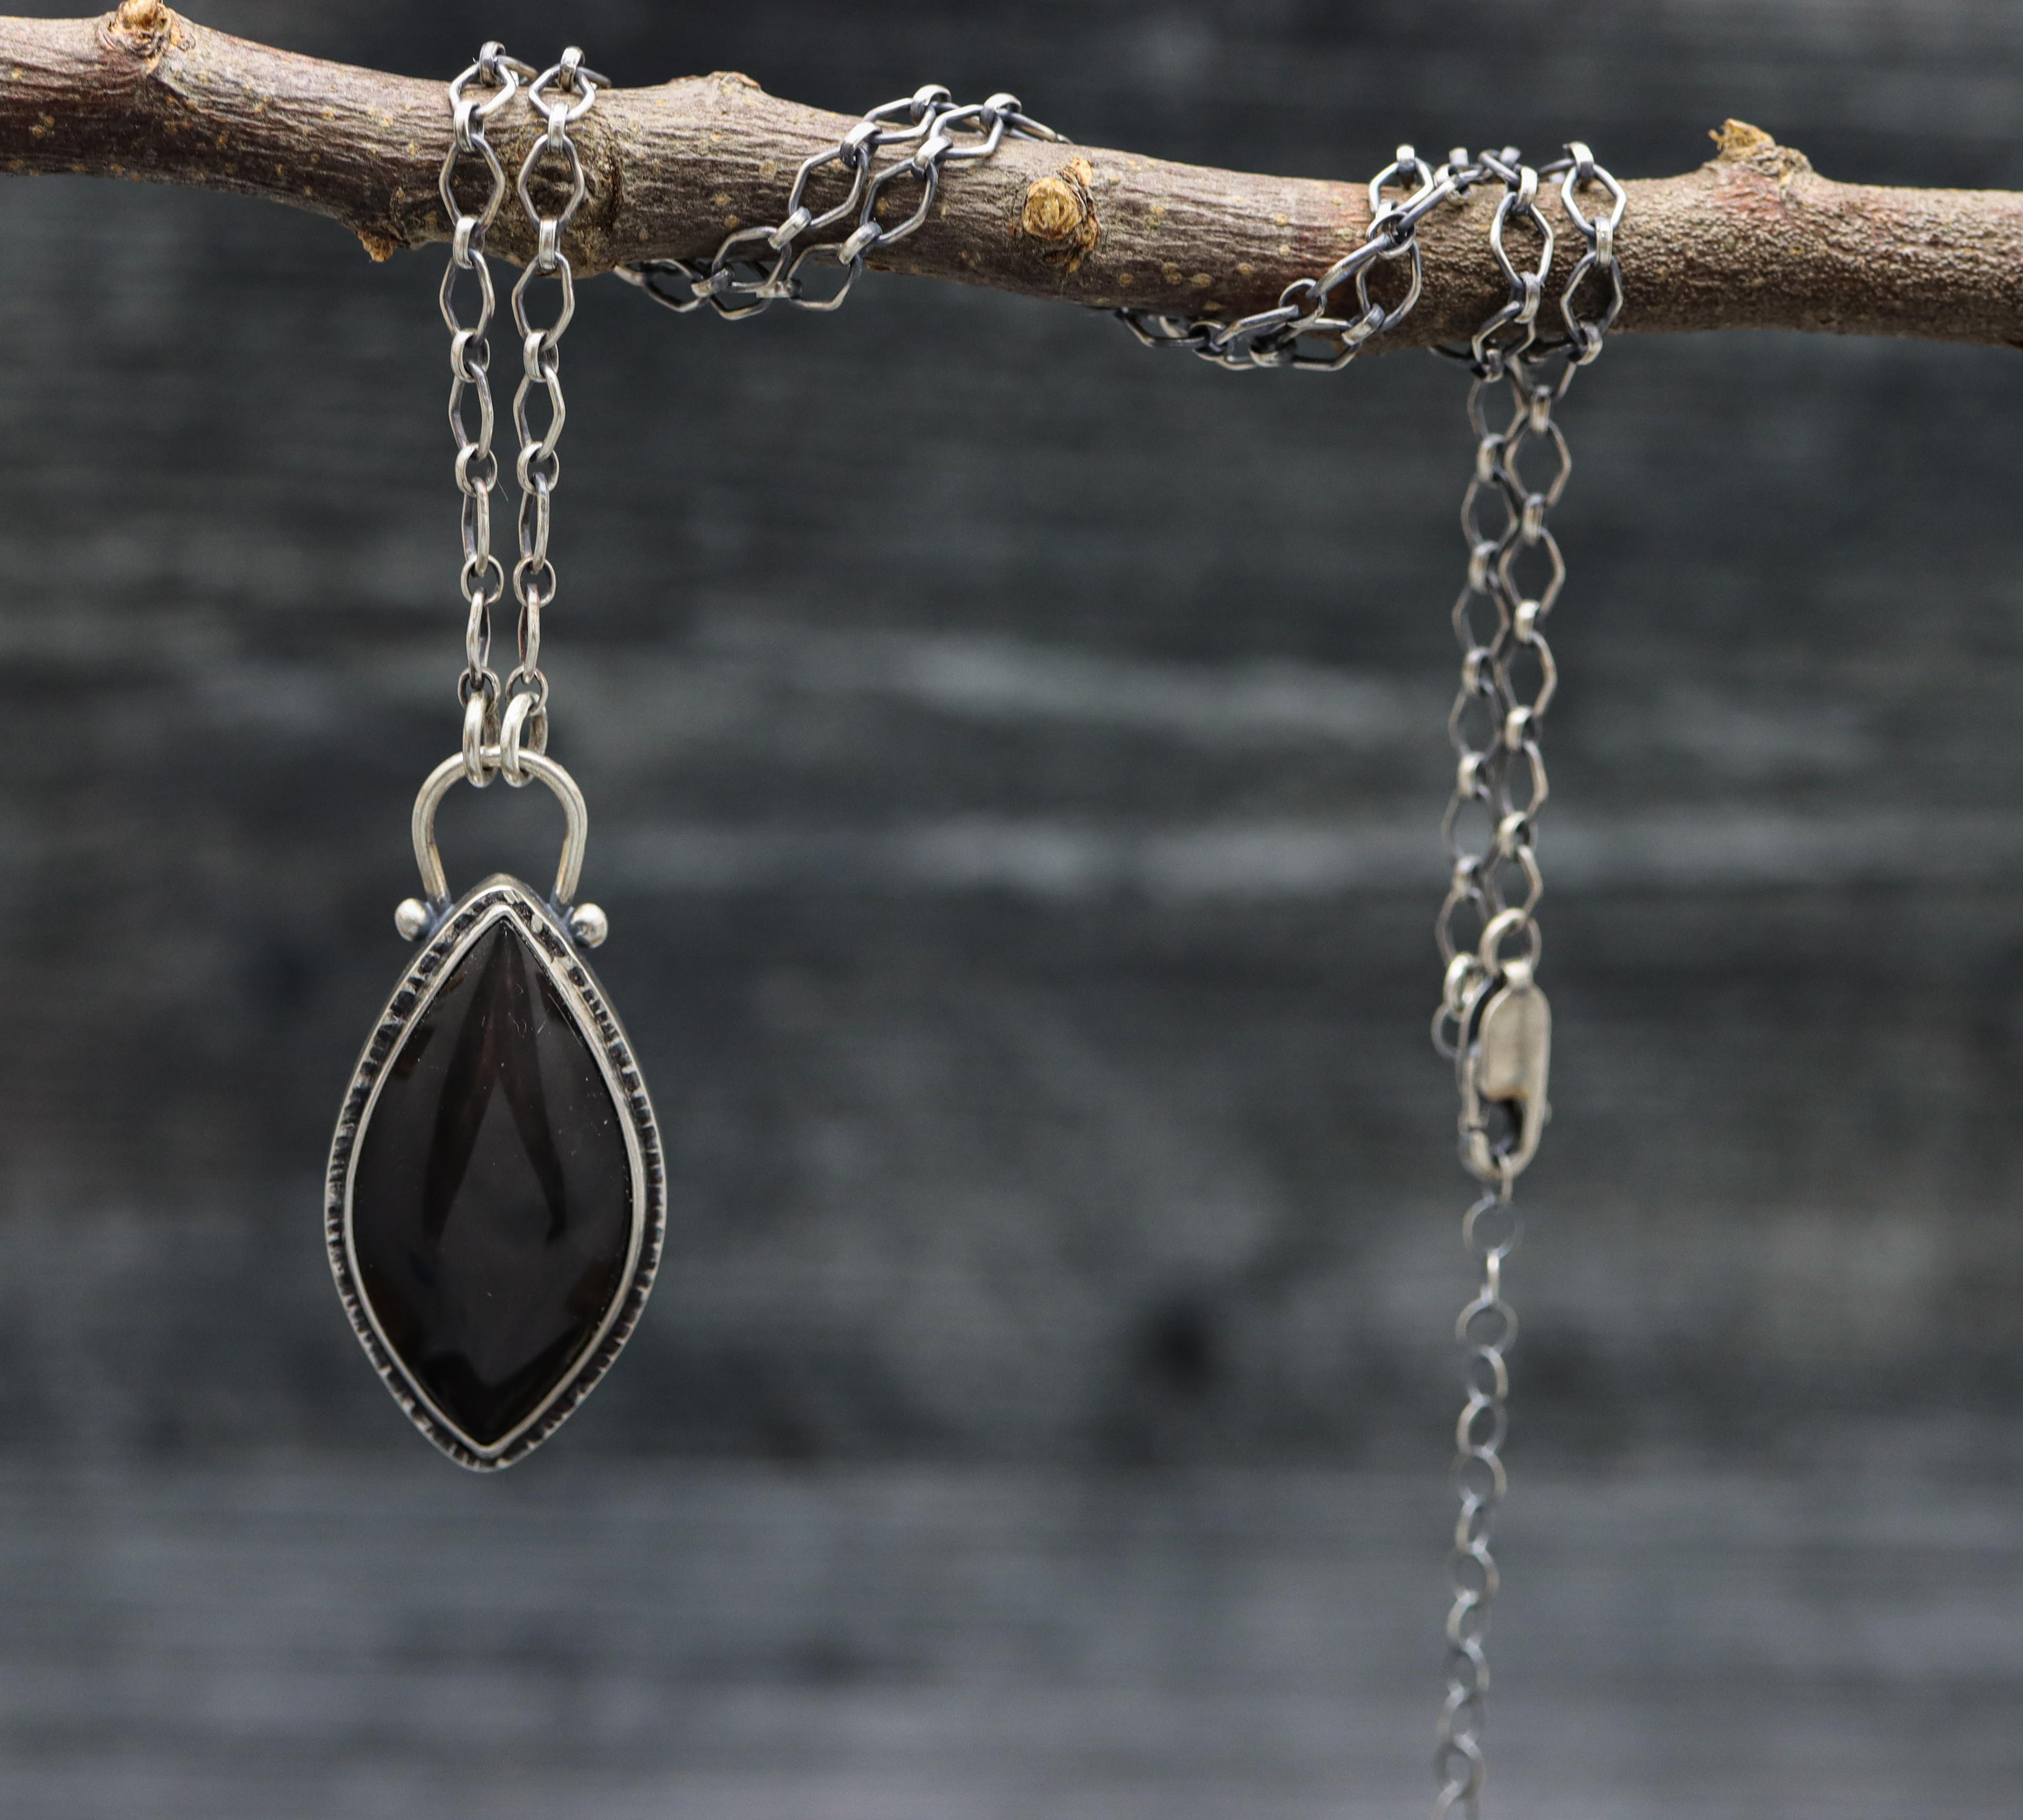 Silver Sheen Black Obsidian Pendant Sterling Silver One Of a Kind Gemstone Necklace